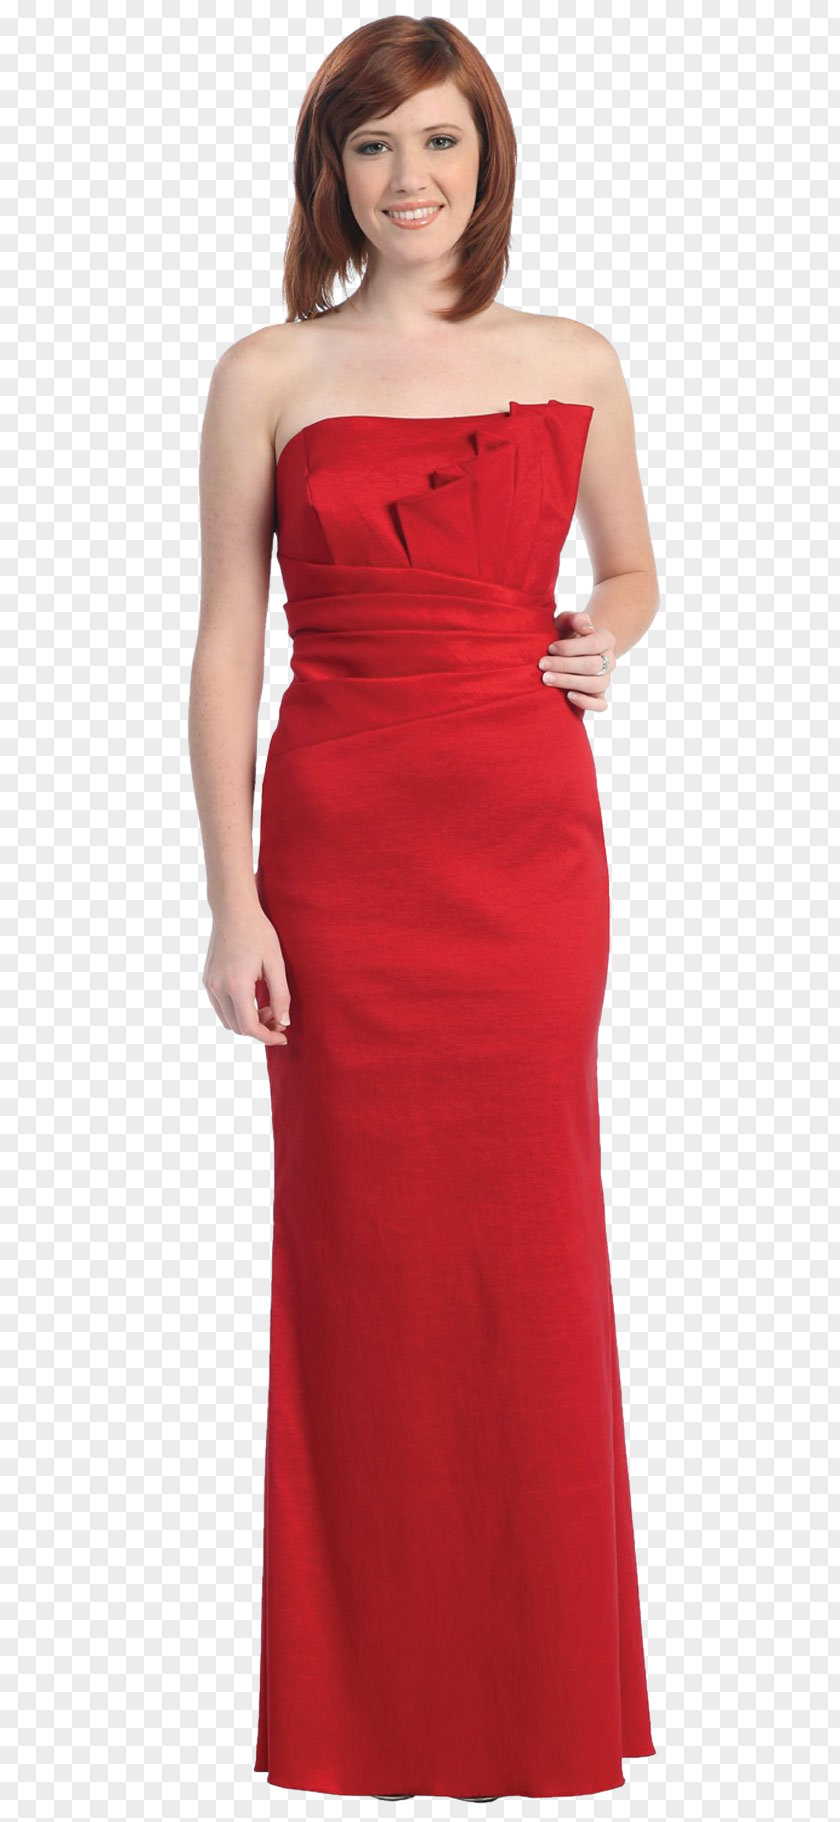 Dress Gown Robe Clothing Woman PNG